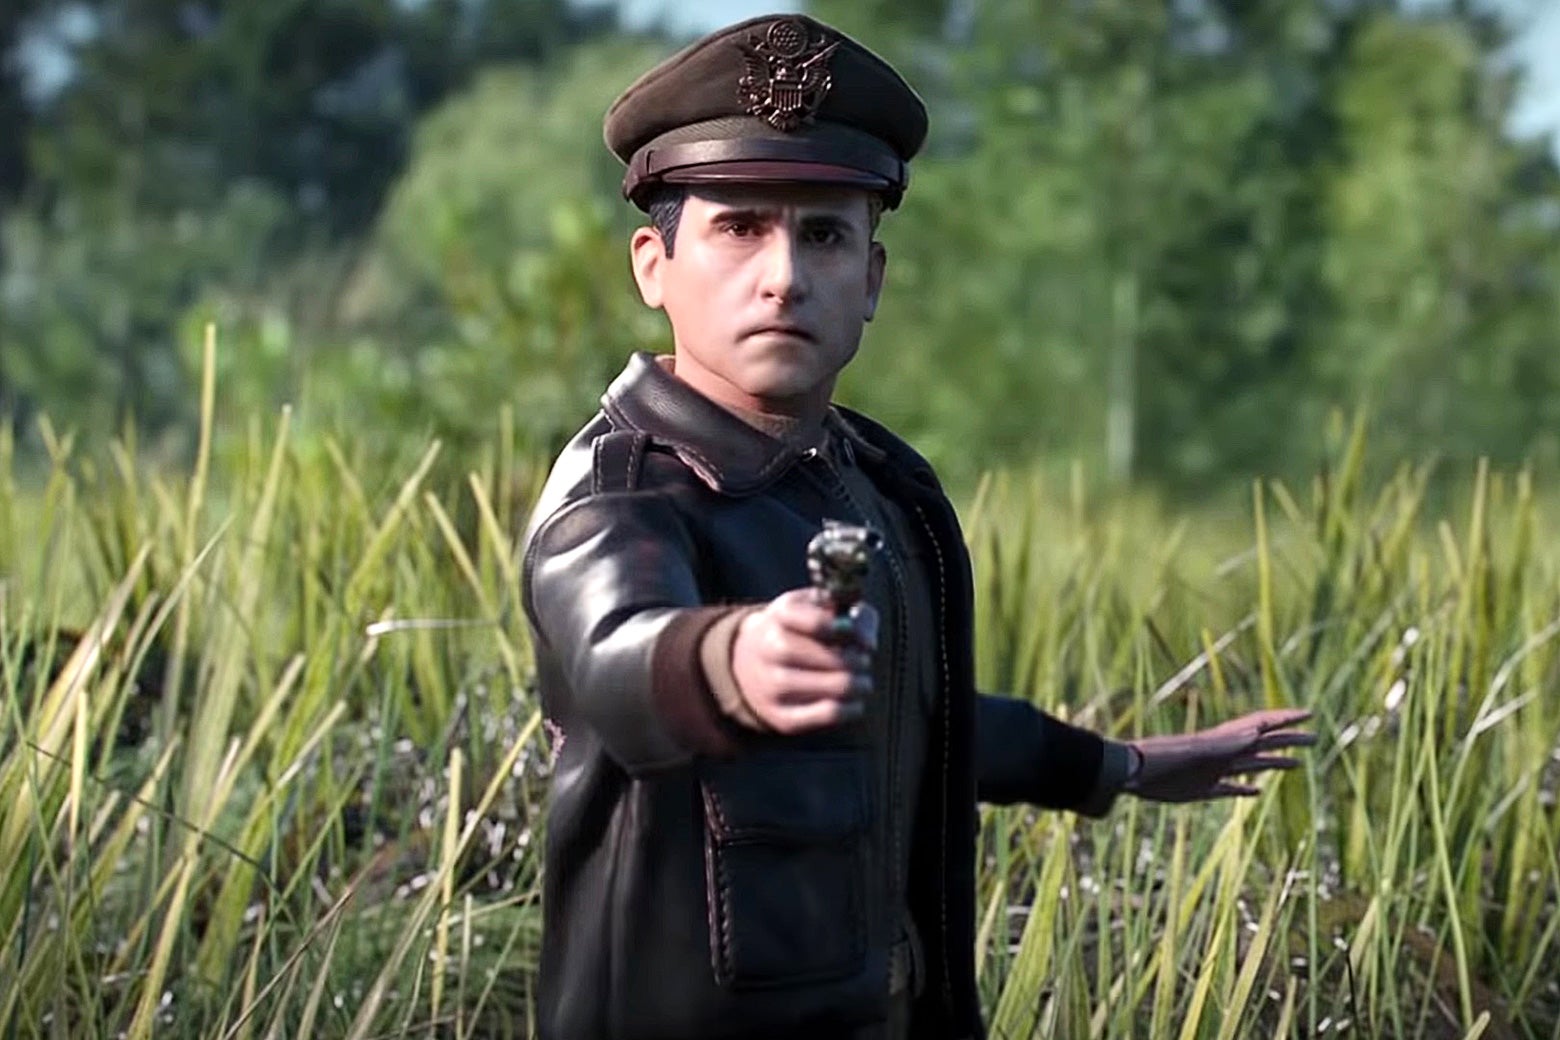 Steve Carell as a plastic action figure in Welcome to Marwen.